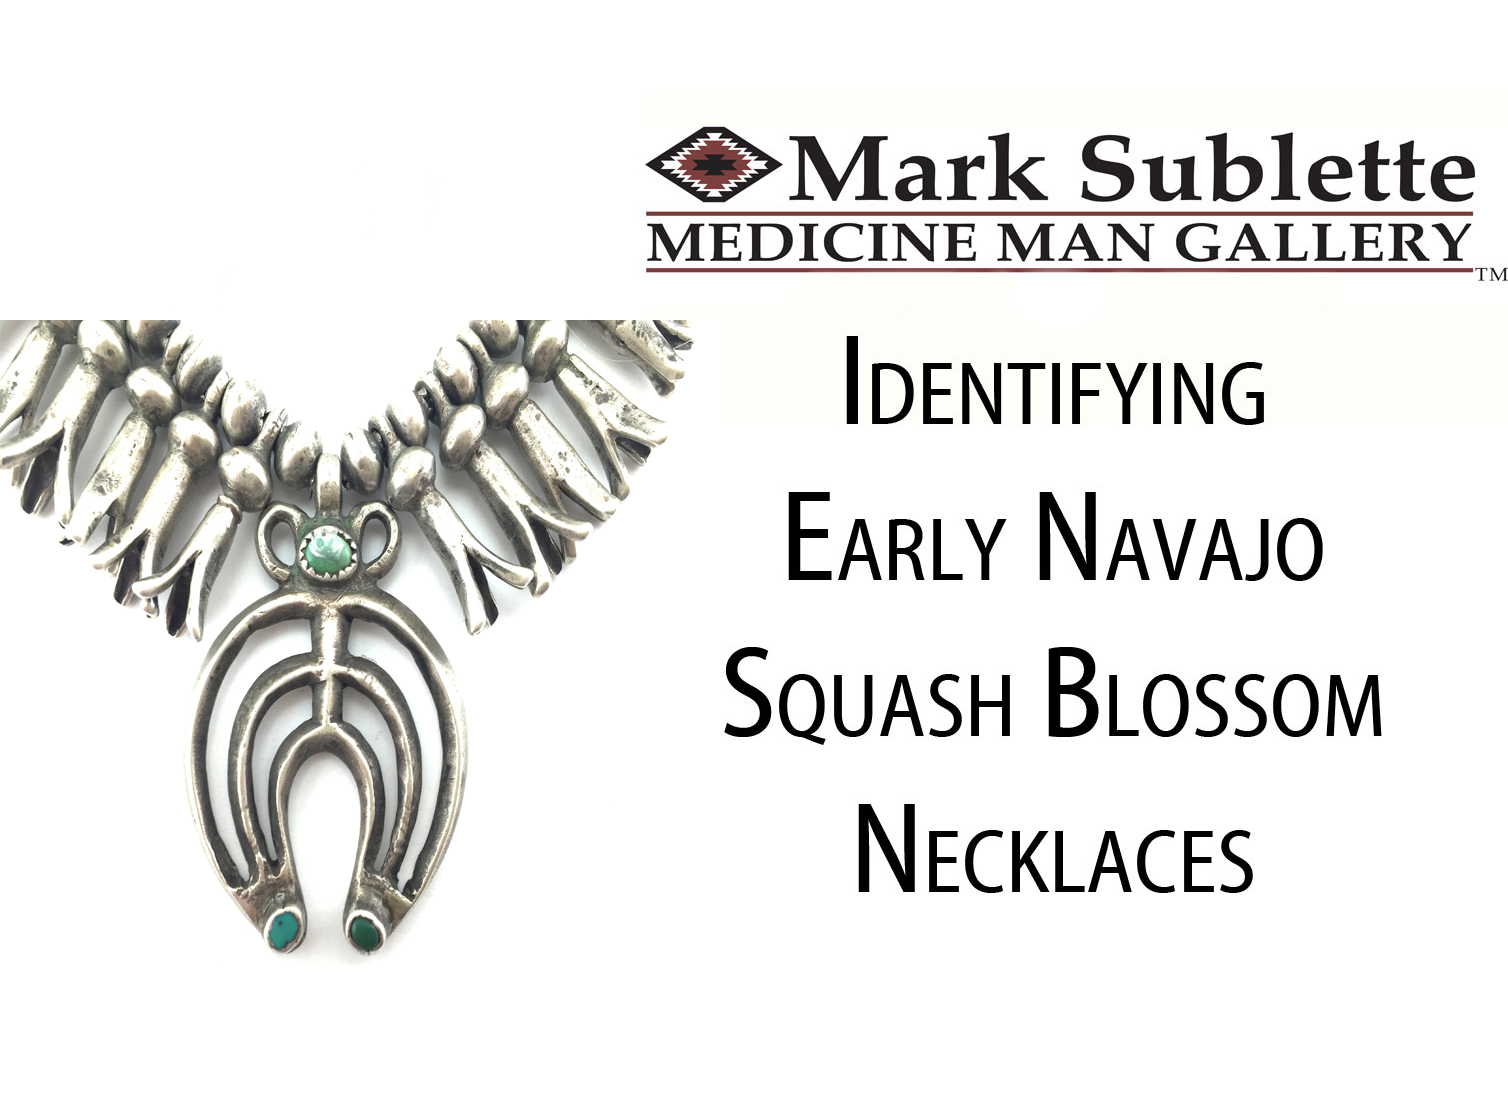 Native American Indian Jewelry: How to identify and Date Early Navajo Squash Blossom Necklaces